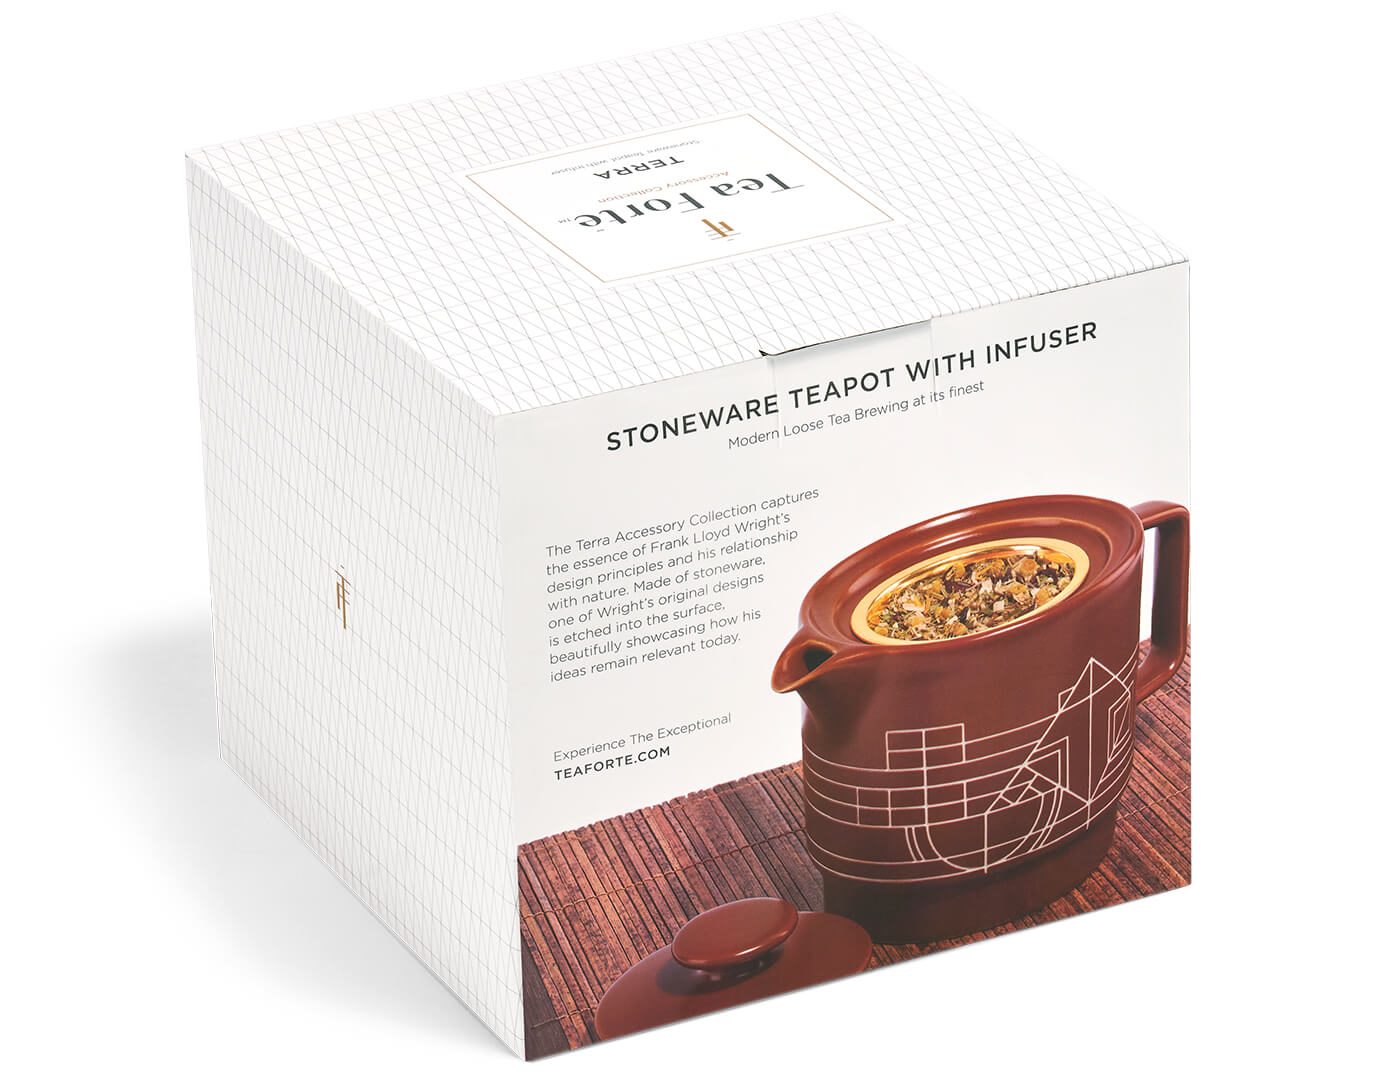 Terra stoneware Teapot with infuser box, back